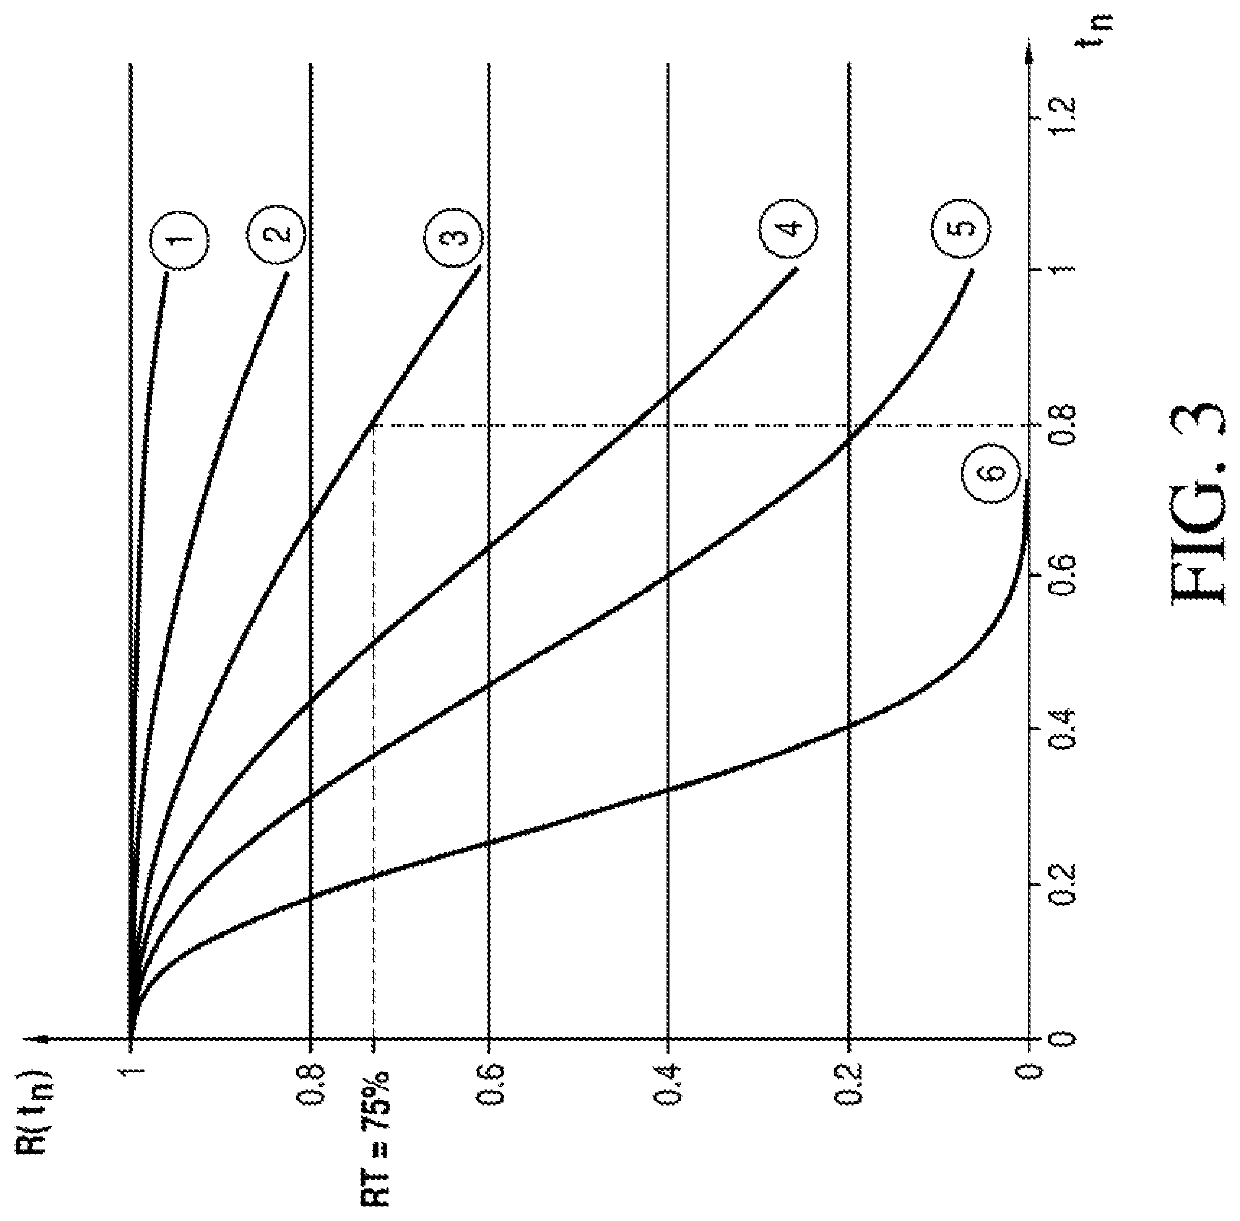 Method of determining a calibration or maintenance time interval